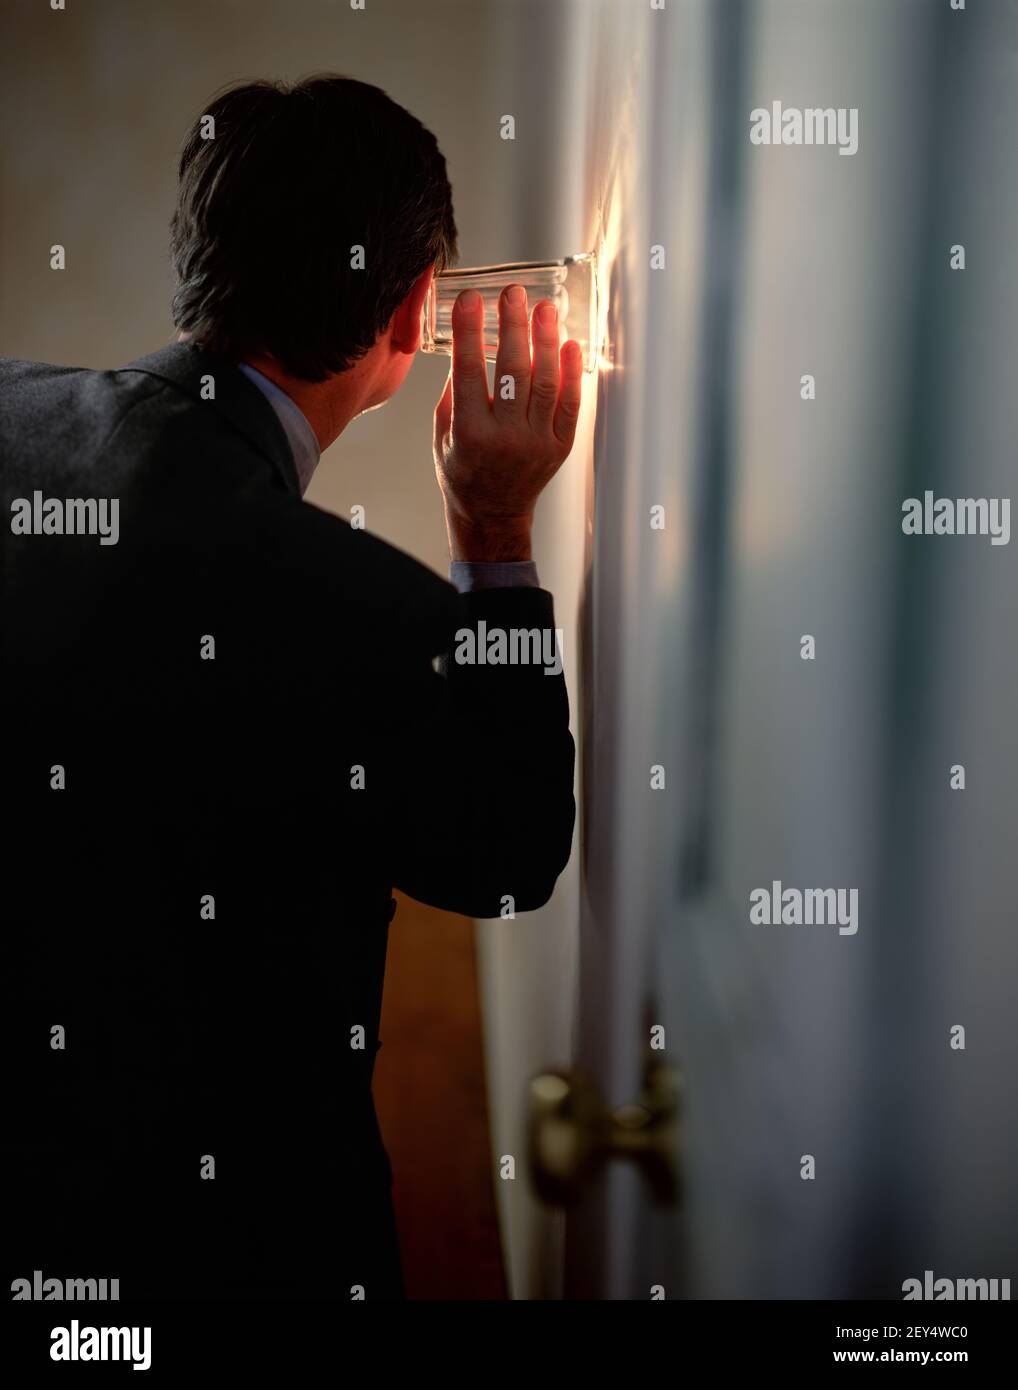 businessman eavesdropping on a conversation in another room by using a glass to amplify the sound Stock Photo